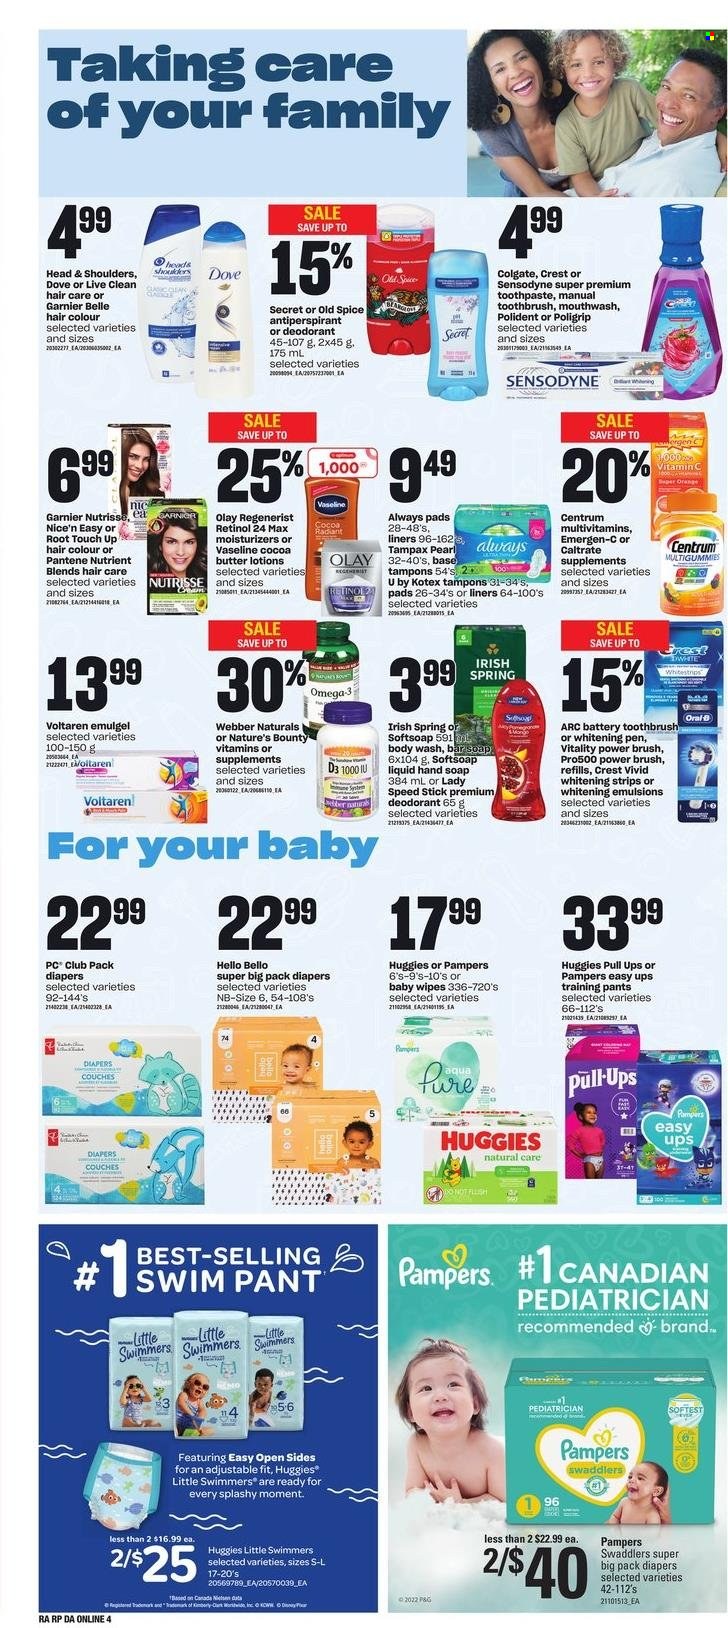 thumbnail - Dominion Flyer - June 30, 2022 - July 06, 2022 - Sales products - strips, spice, wipes, pants, baby wipes, nappies, baby pants, body wash, Softsoap, hand soap, Vaseline, soap bar, soap, toothbrush, toothpaste, mouthwash, Polident, Crest, Always pads, Kotex, tampons, moisturizer, Olay, hair color, anti-perspirant, Speed Stick, pen, multivitamin, Nature's Bounty, vitamin c, Omega-3, Emergen-C, vitamin D3, Centrum, Dove, Colgate, Garnier, Tampax, Head & Shoulders, Huggies, Pampers, Pantene, Old Spice, Oral-B, Sensodyne, oranges, deodorant. Page 10.